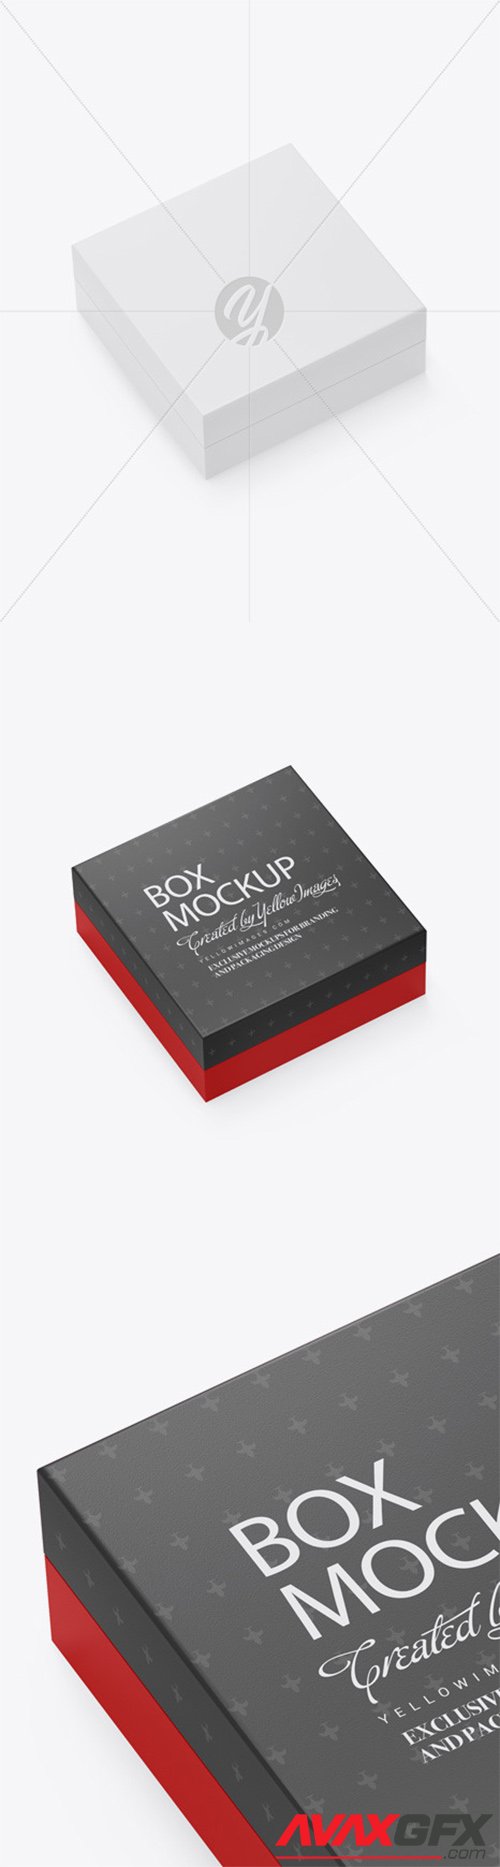 Paper Box Mockup 54187 » AVAXGFX - All Downloads that You Need in One